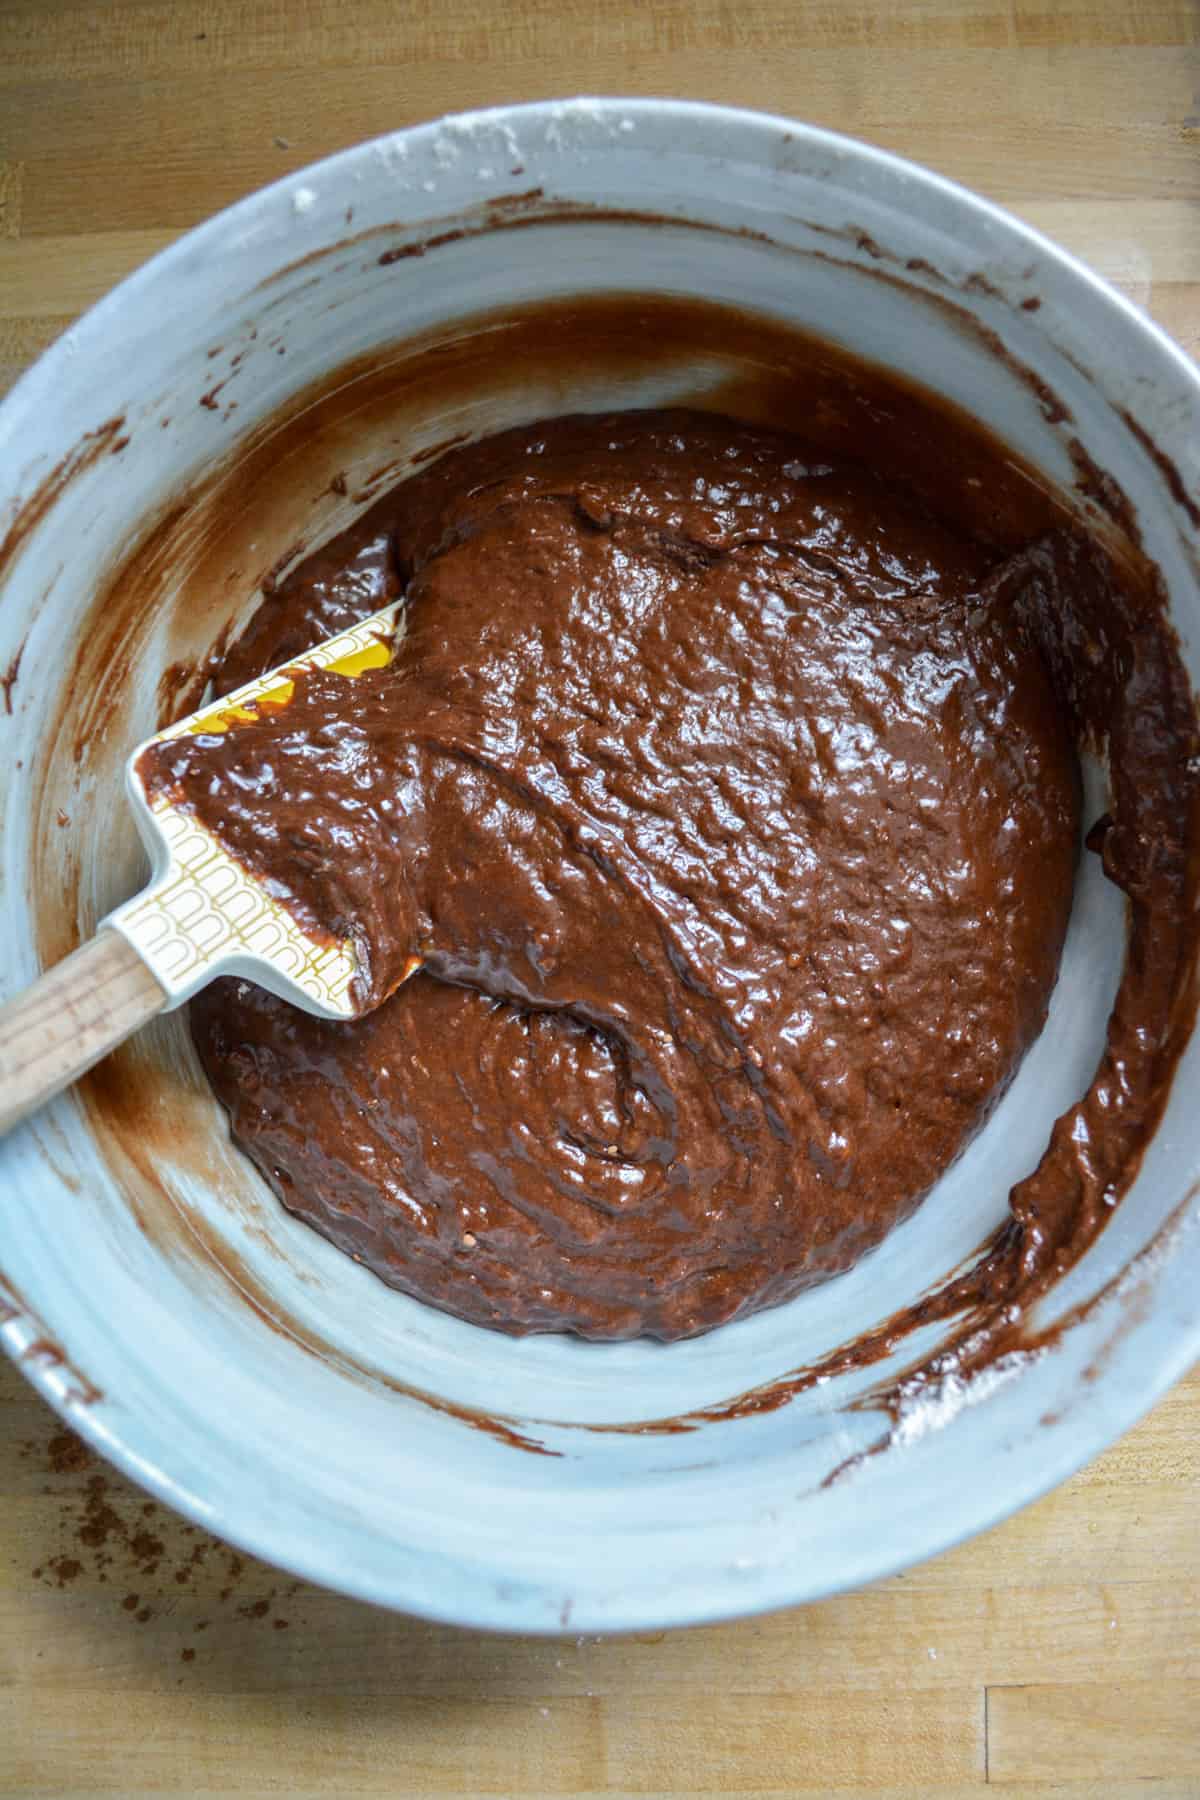 Dry ingredients folded into the batter in a mixing bowl with a spatula toward the left.